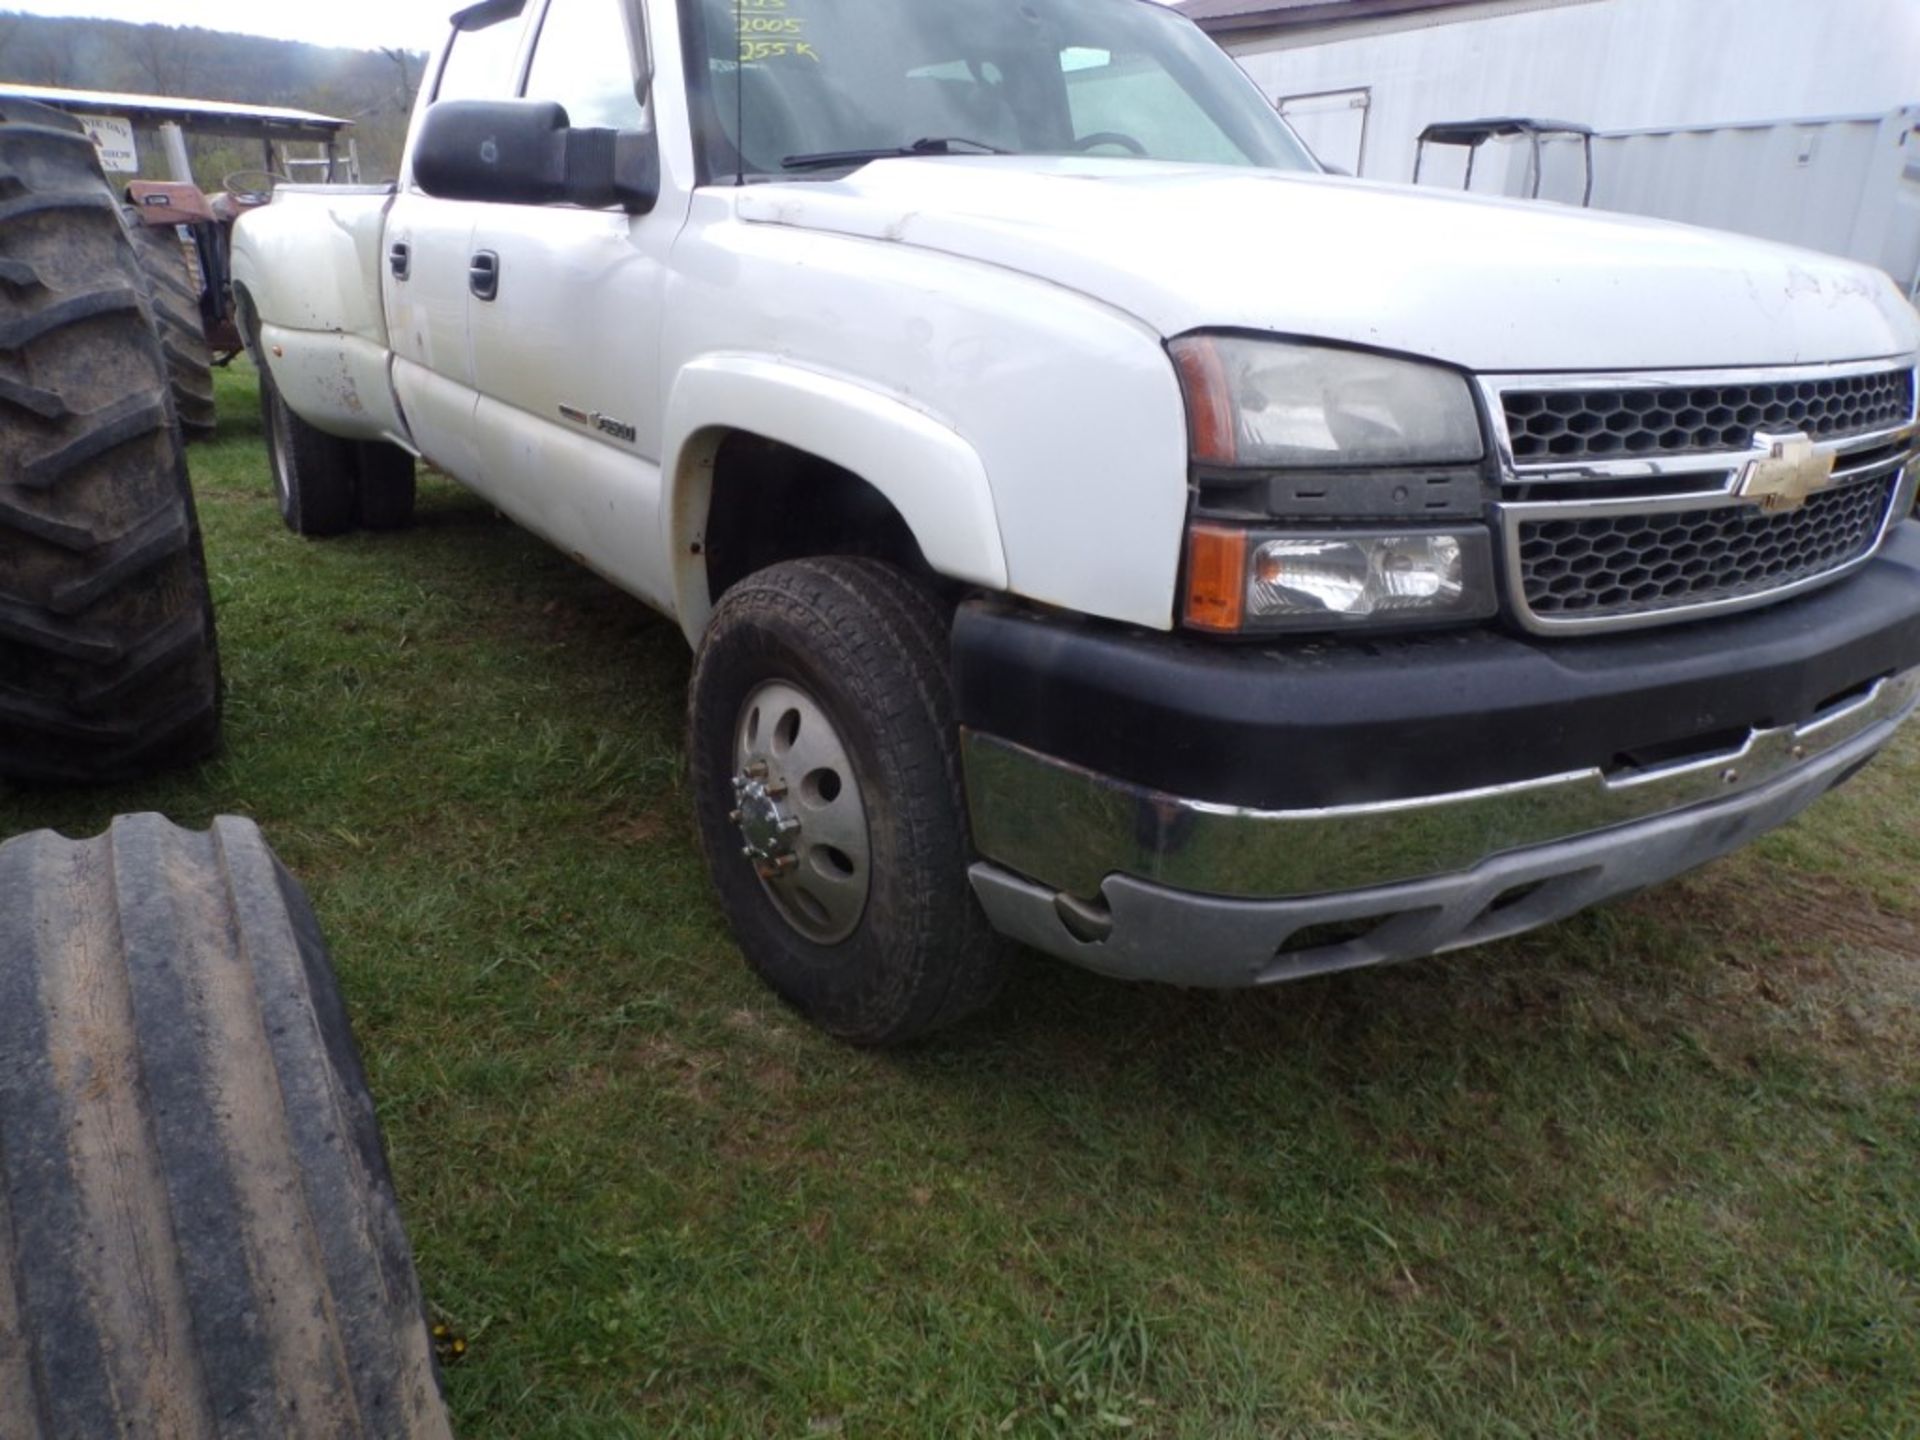 2005 Chevrolet 3500 Dually, 4WD, Duramax Dsl Eng, Vin# 1GCJK332X5F970276 - HAVE TITLE (463) - Image 6 of 7